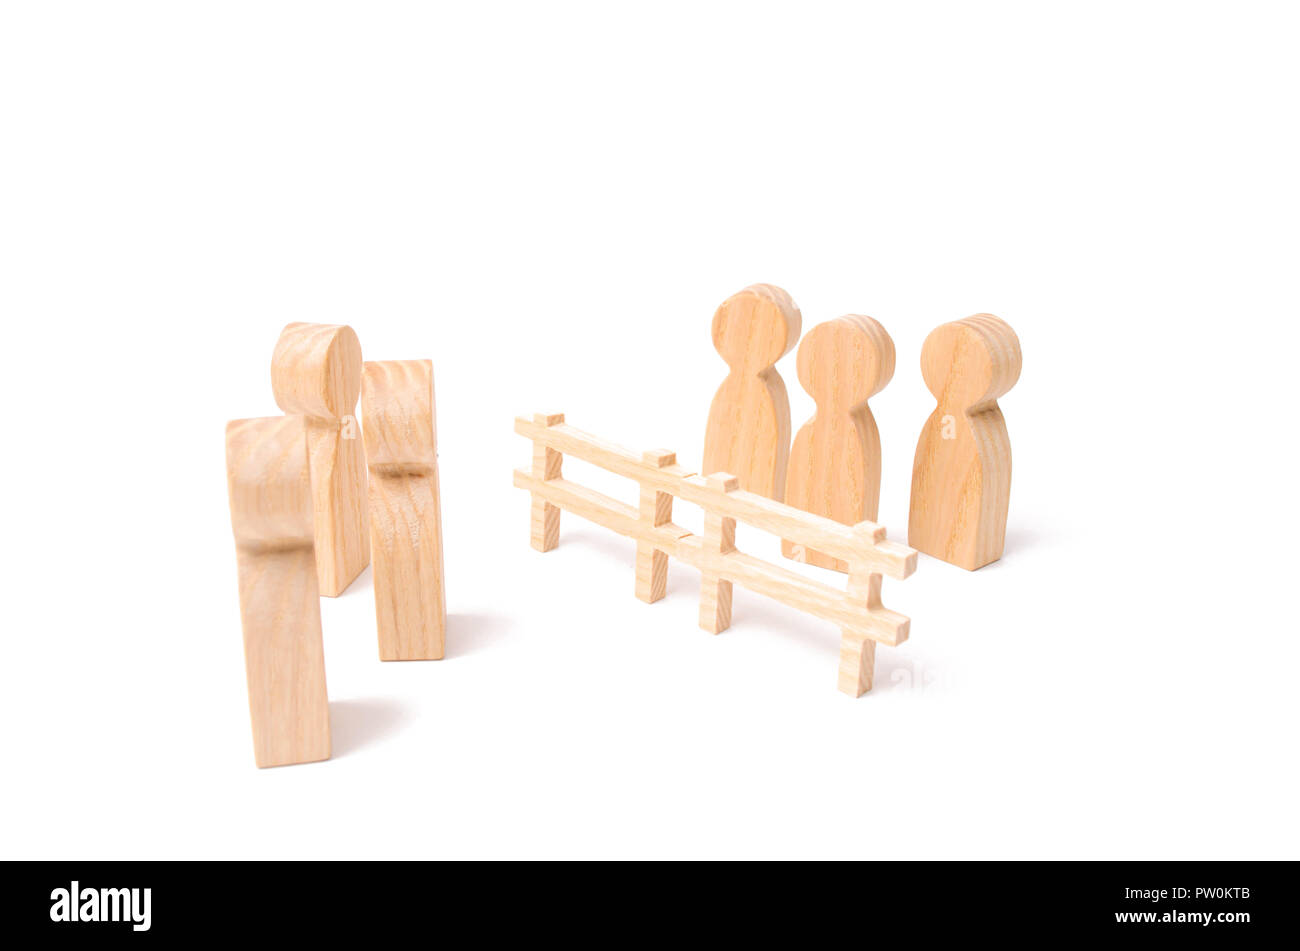 Negotiations of businessmen. A wooden fence divides the two groups discussing the case. Termination and breakdown of relations, breaking ties. Contrac Stock Photo